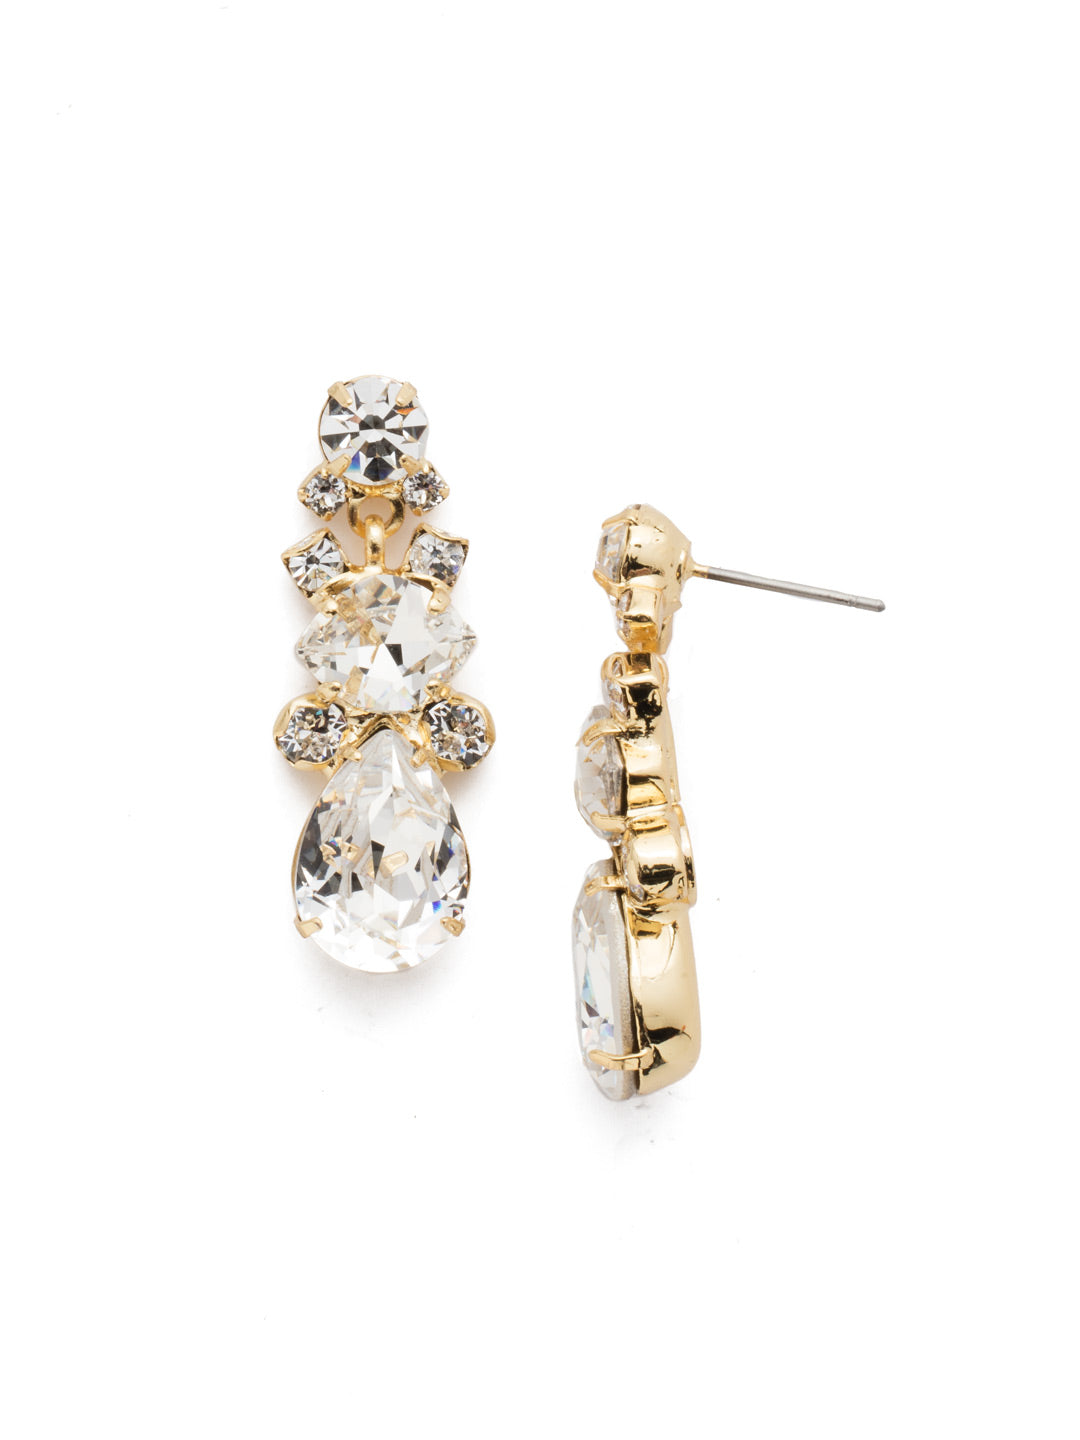 Iberis Dangle Earrings - EDS36BGCRY - <p>A dainty round and an X shaped stone cluster perch atop a beautiful pear shaped crystal. From Sorrelli's Crystal collection in our Bright Gold-tone finish.</p>